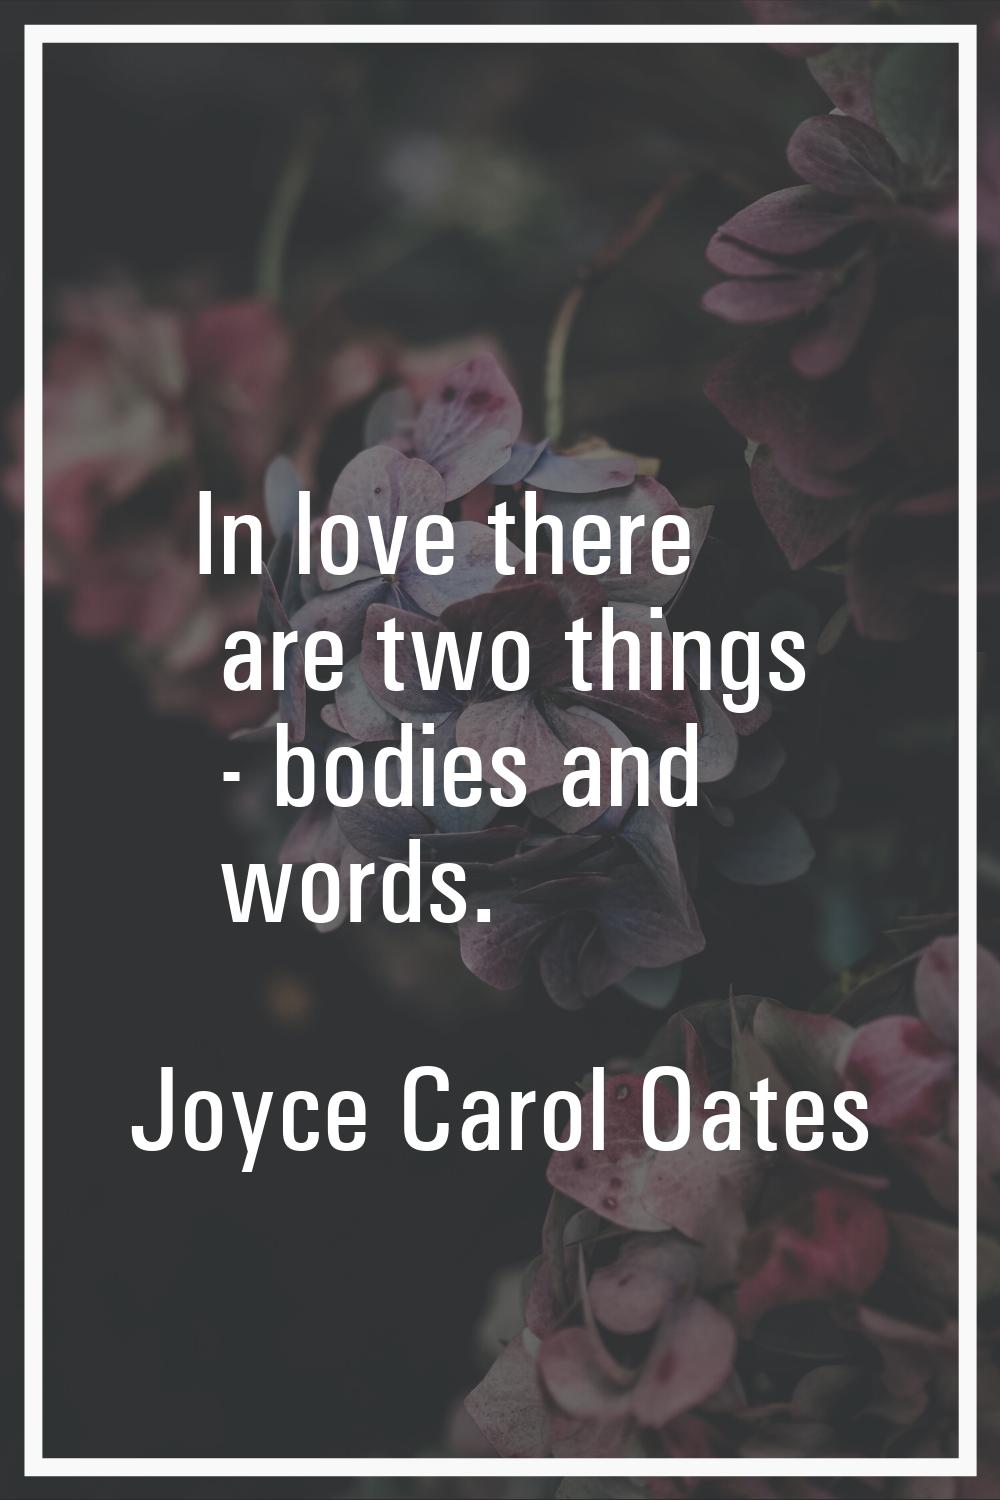 In love there are two things - bodies and words.